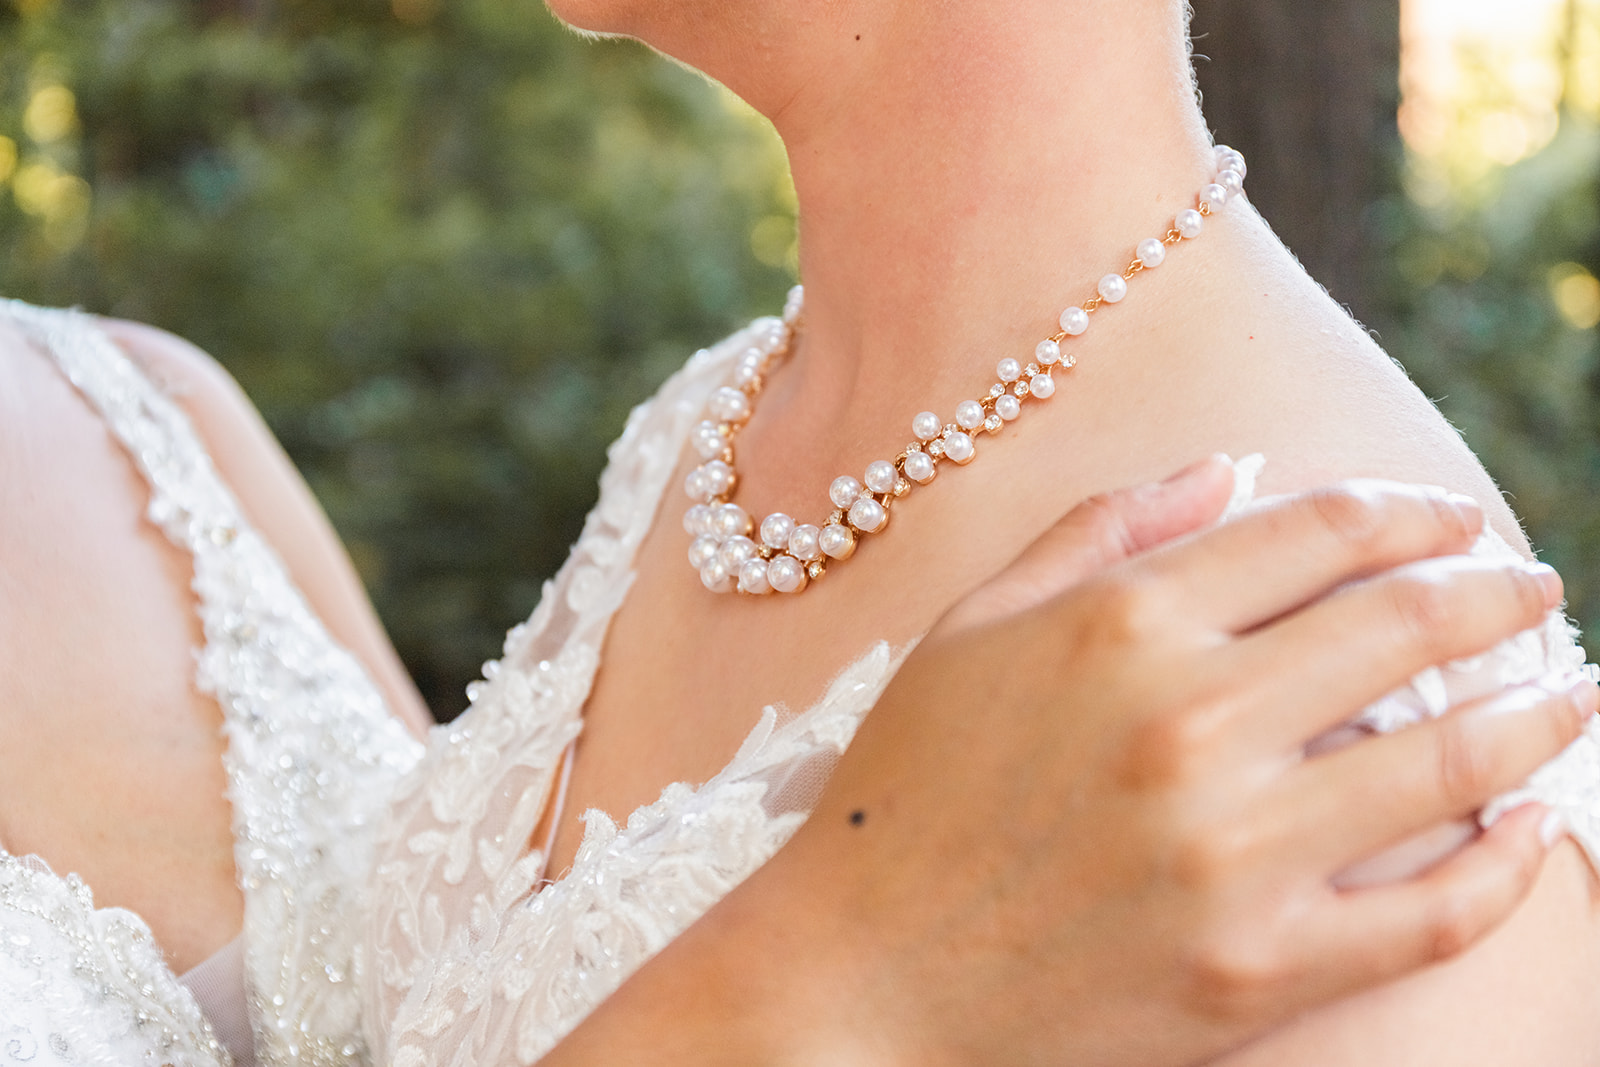 Details of pearl necklace as two brides embrace at their lgbtq+ wedding